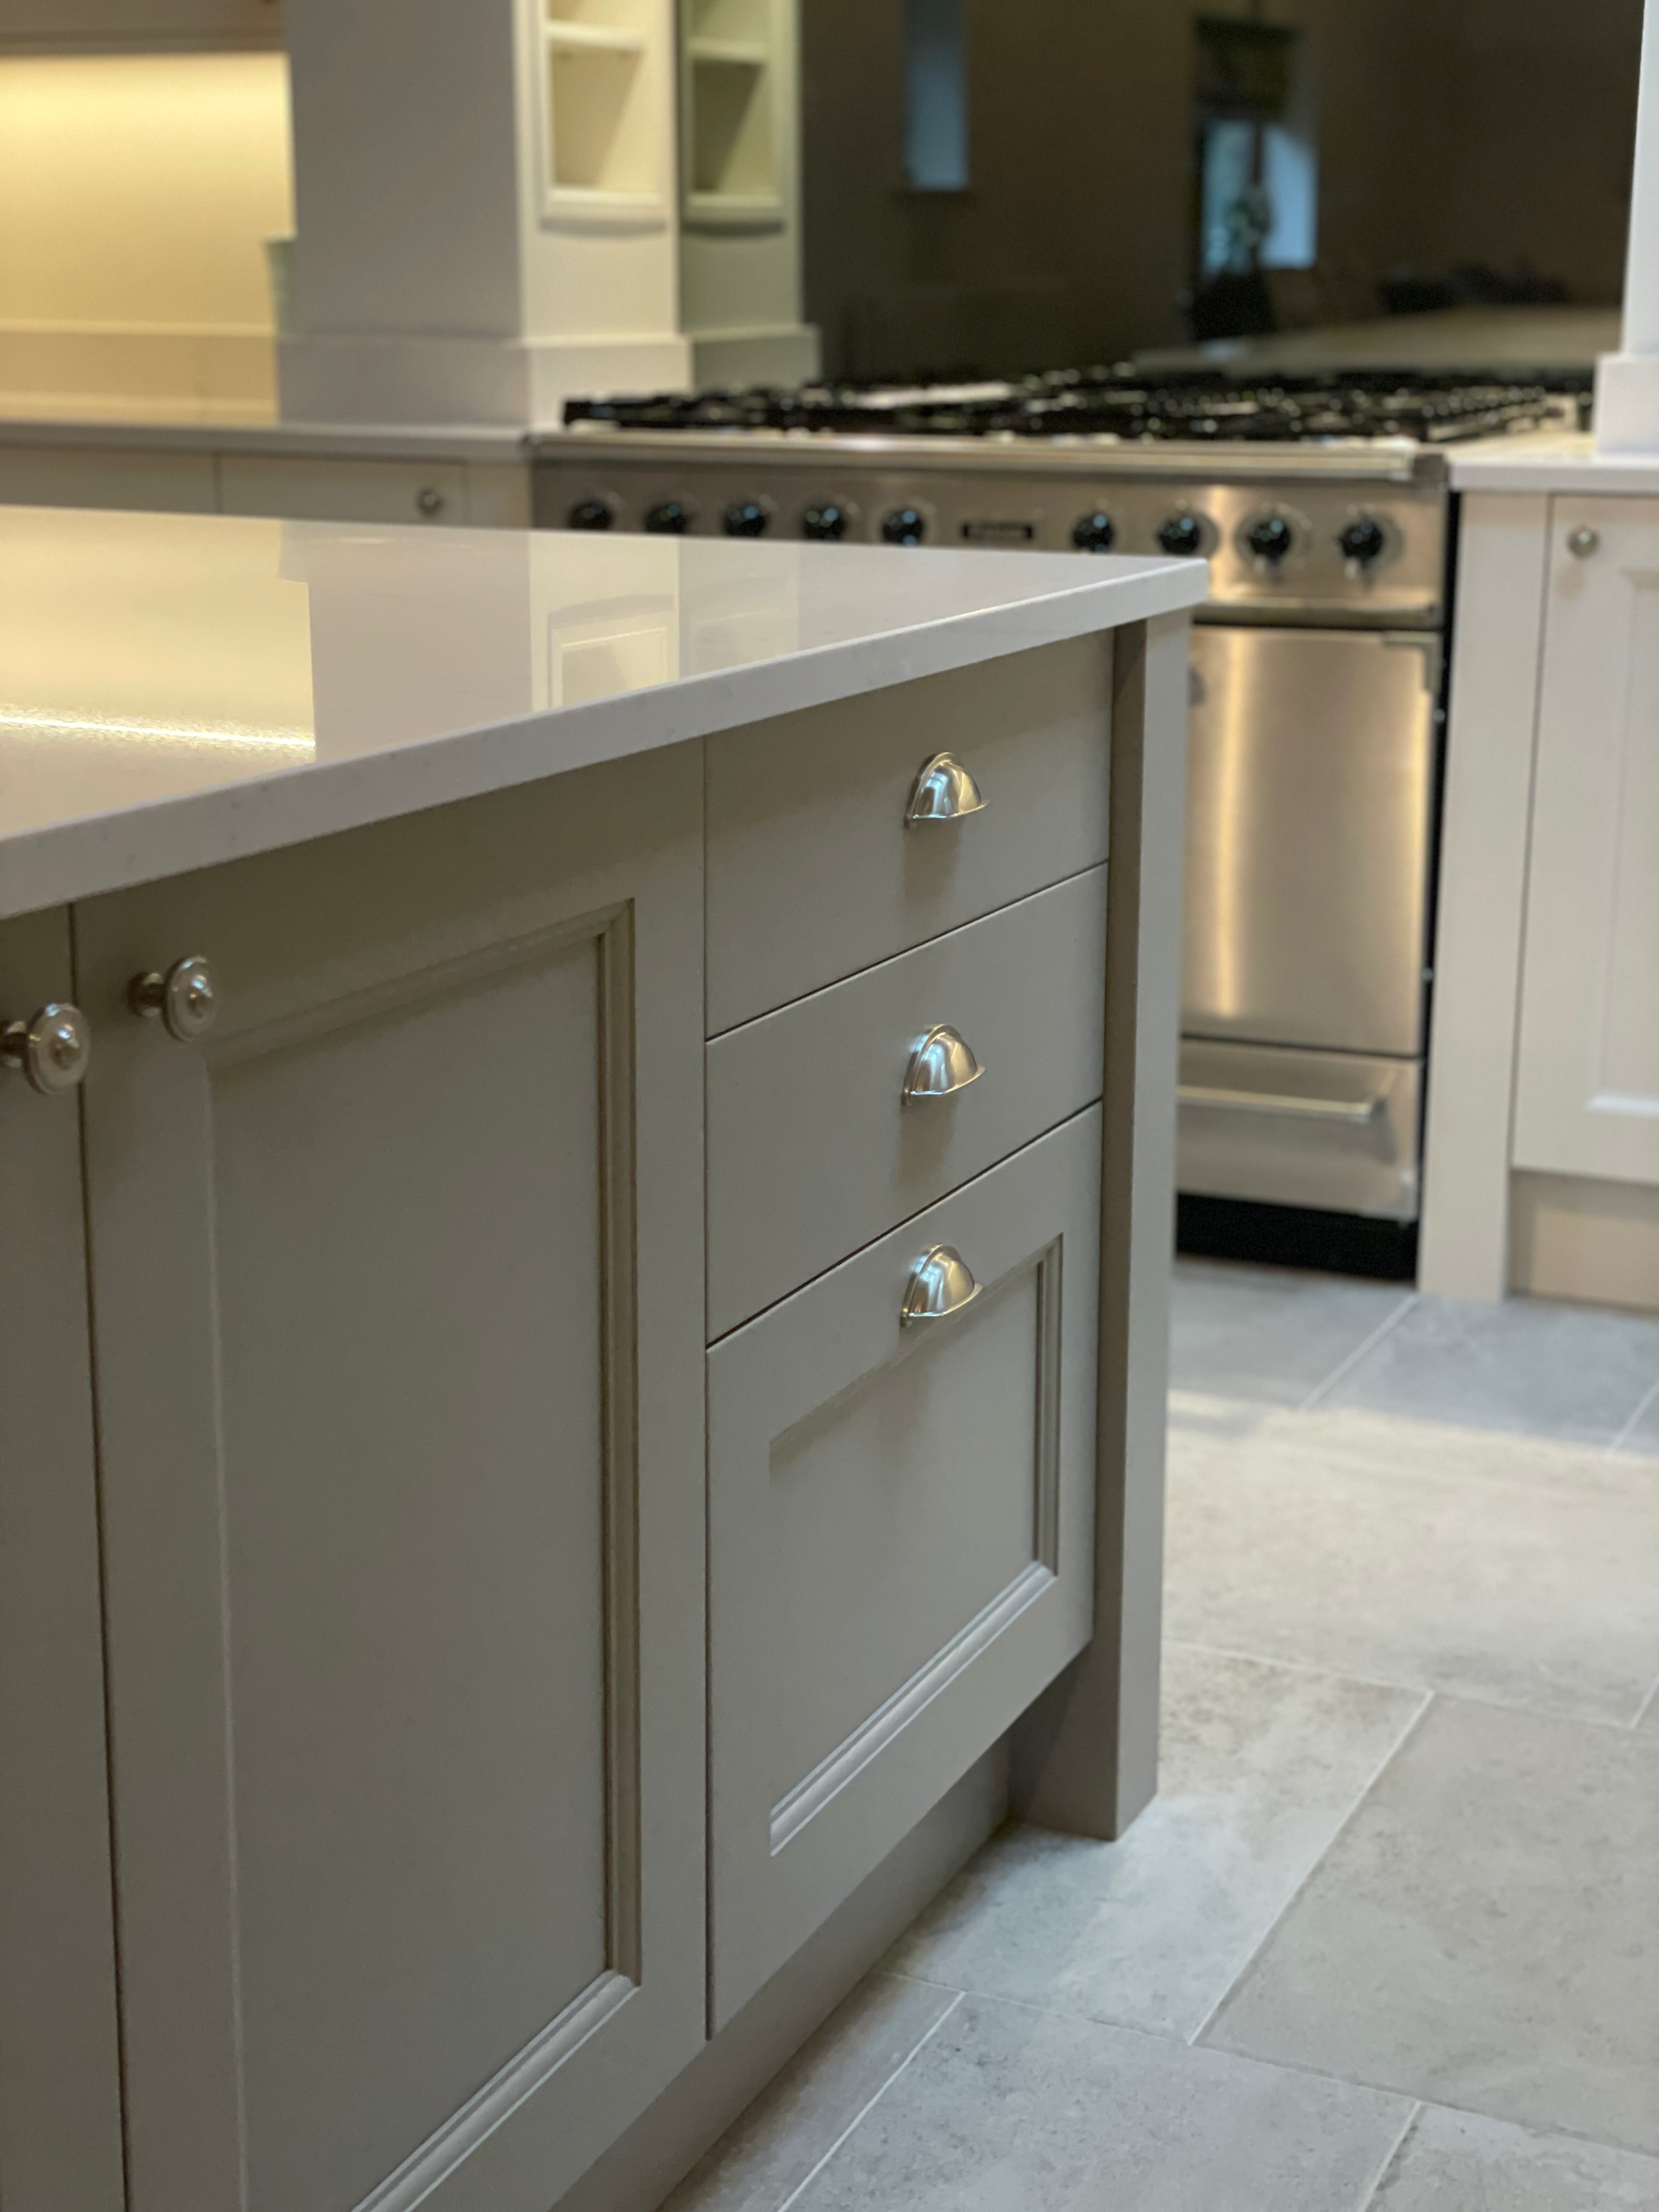   Bespoke Joinery &amp; Cabinetry   BEAUTIFULLY DESIGNED, MANUFACTURED &amp; INSTALLED BY MARSH &amp; CO. 